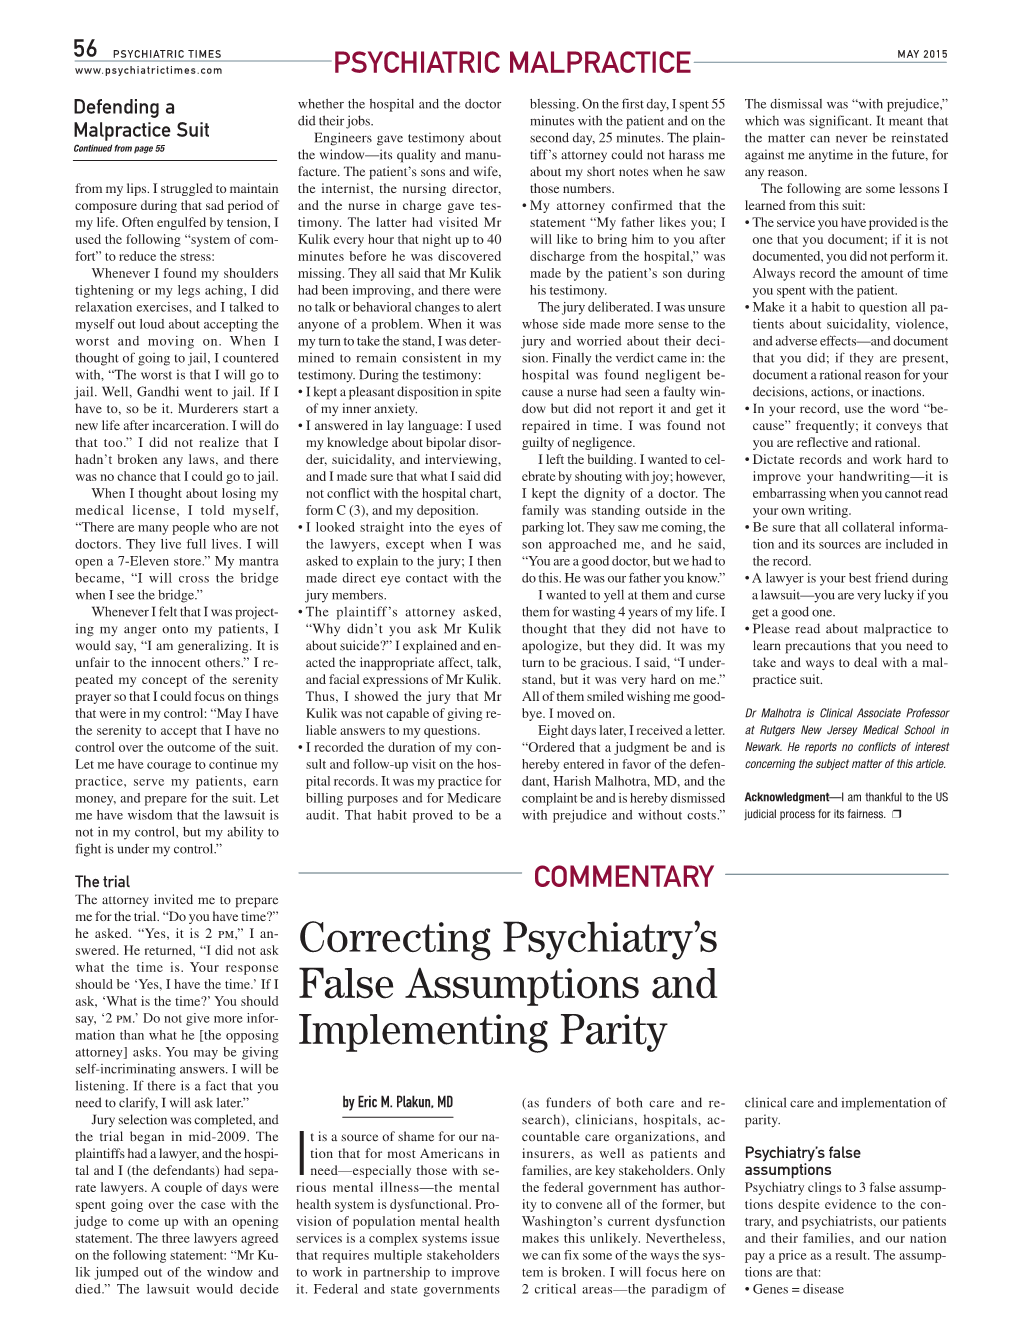 Correcting Psychiatry's False Assumptions and Implementing Parity